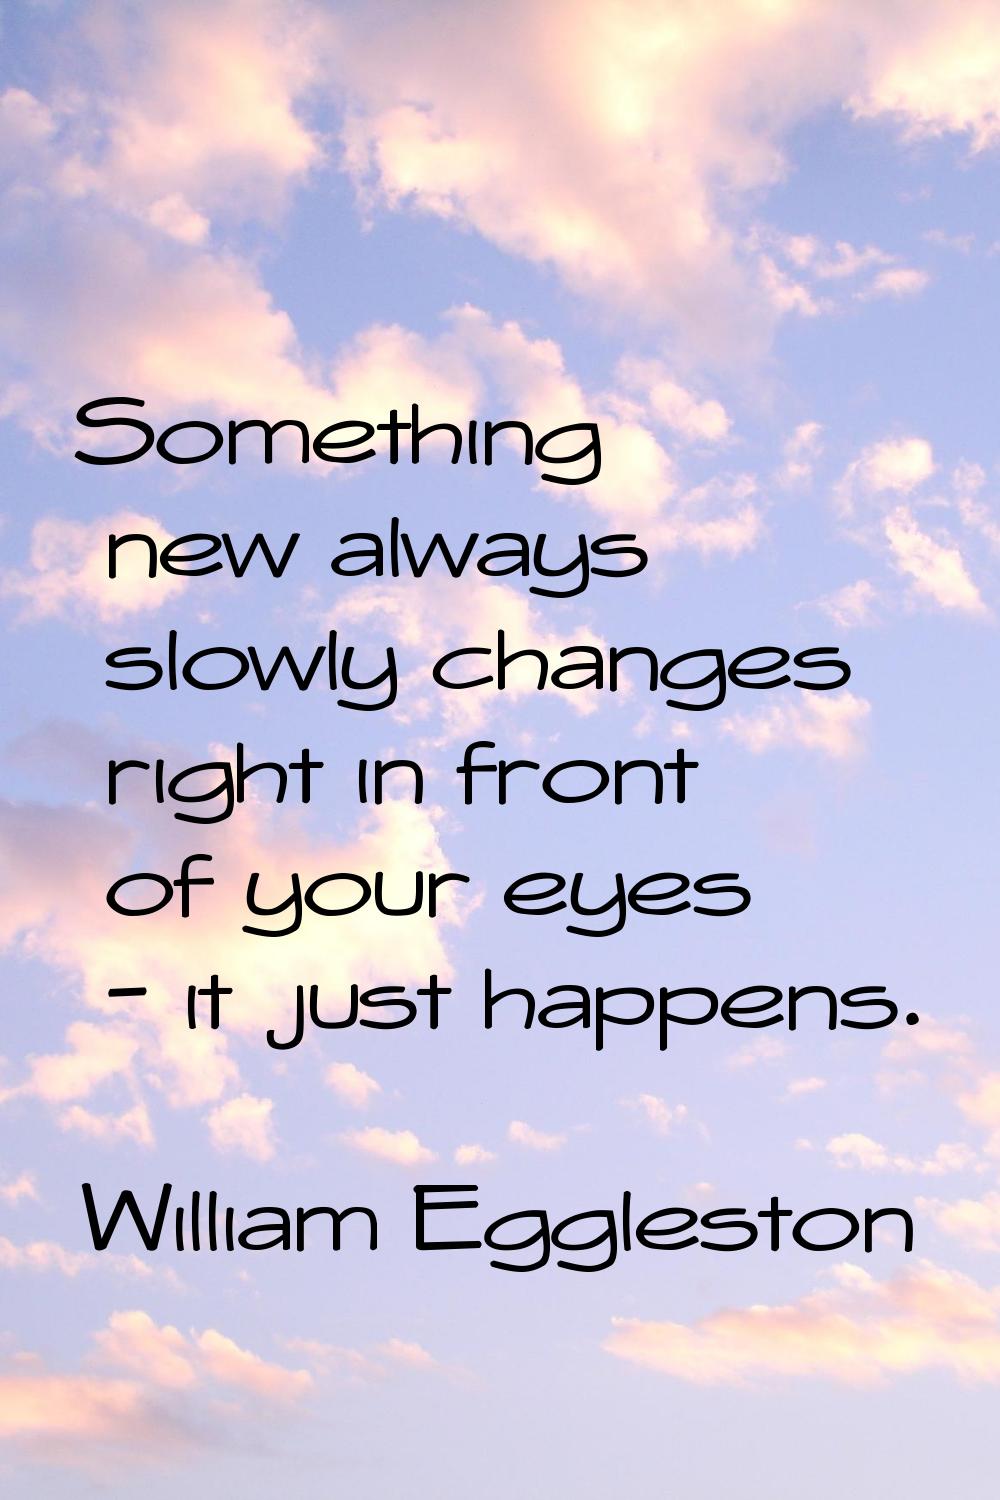 Something new always slowly changes right in front of your eyes - it just happens.